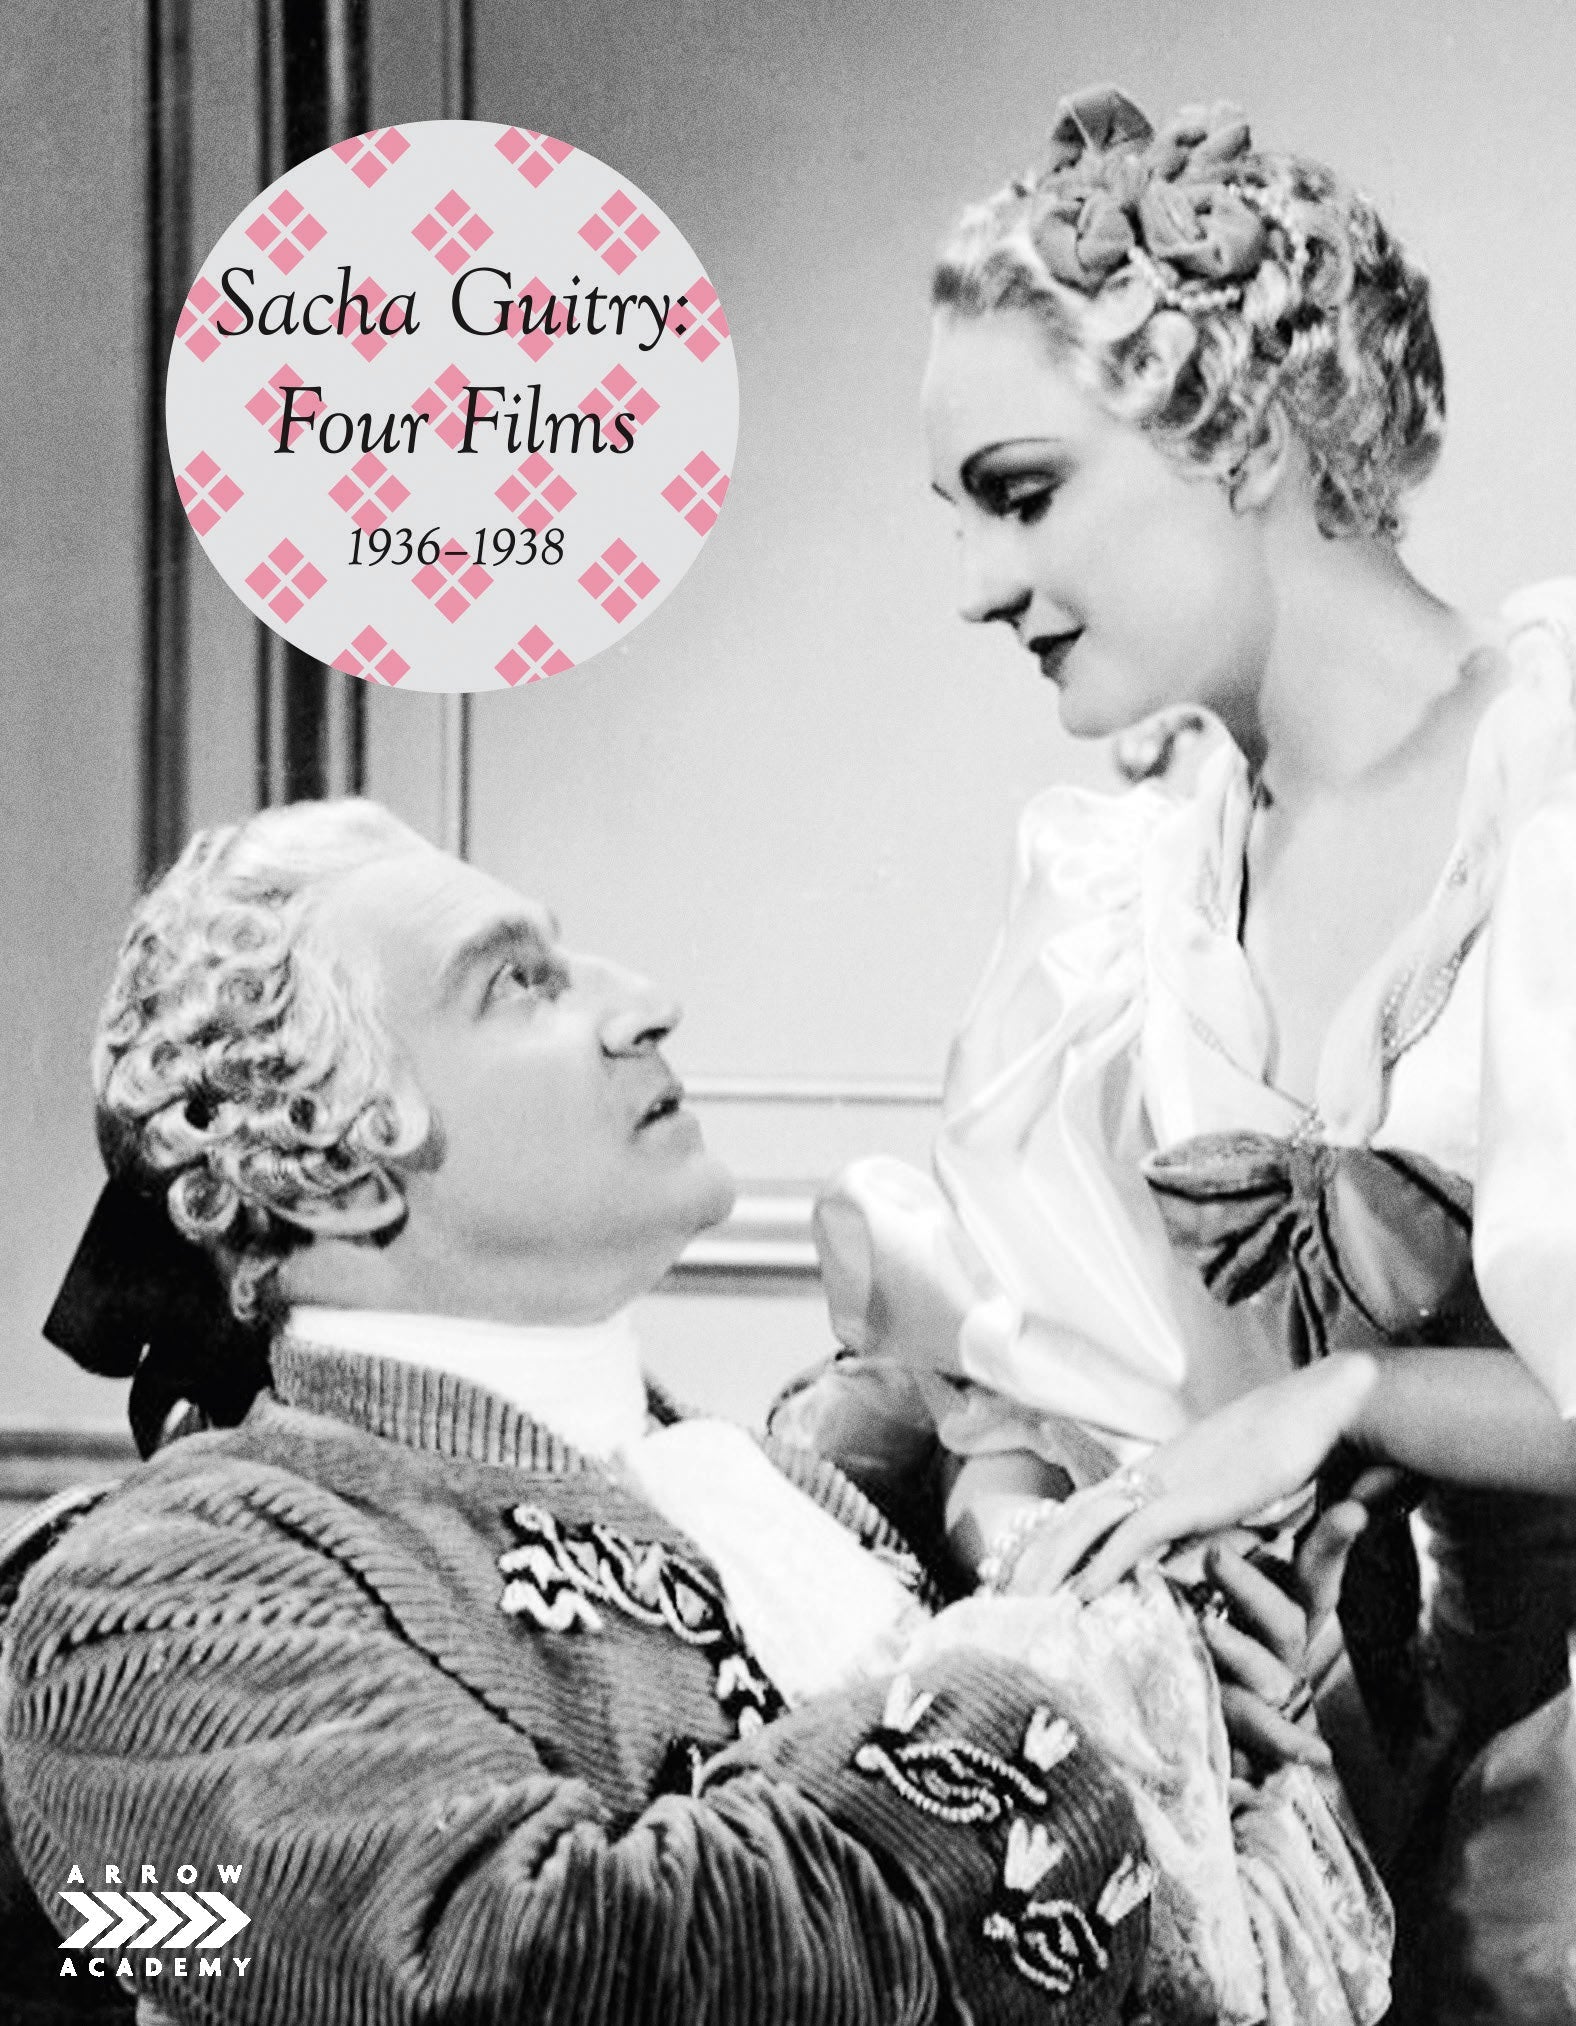 Sacha Guitry: Four Films 1936-1938 (Limited Edition) Blu-Ray Blu-Ray